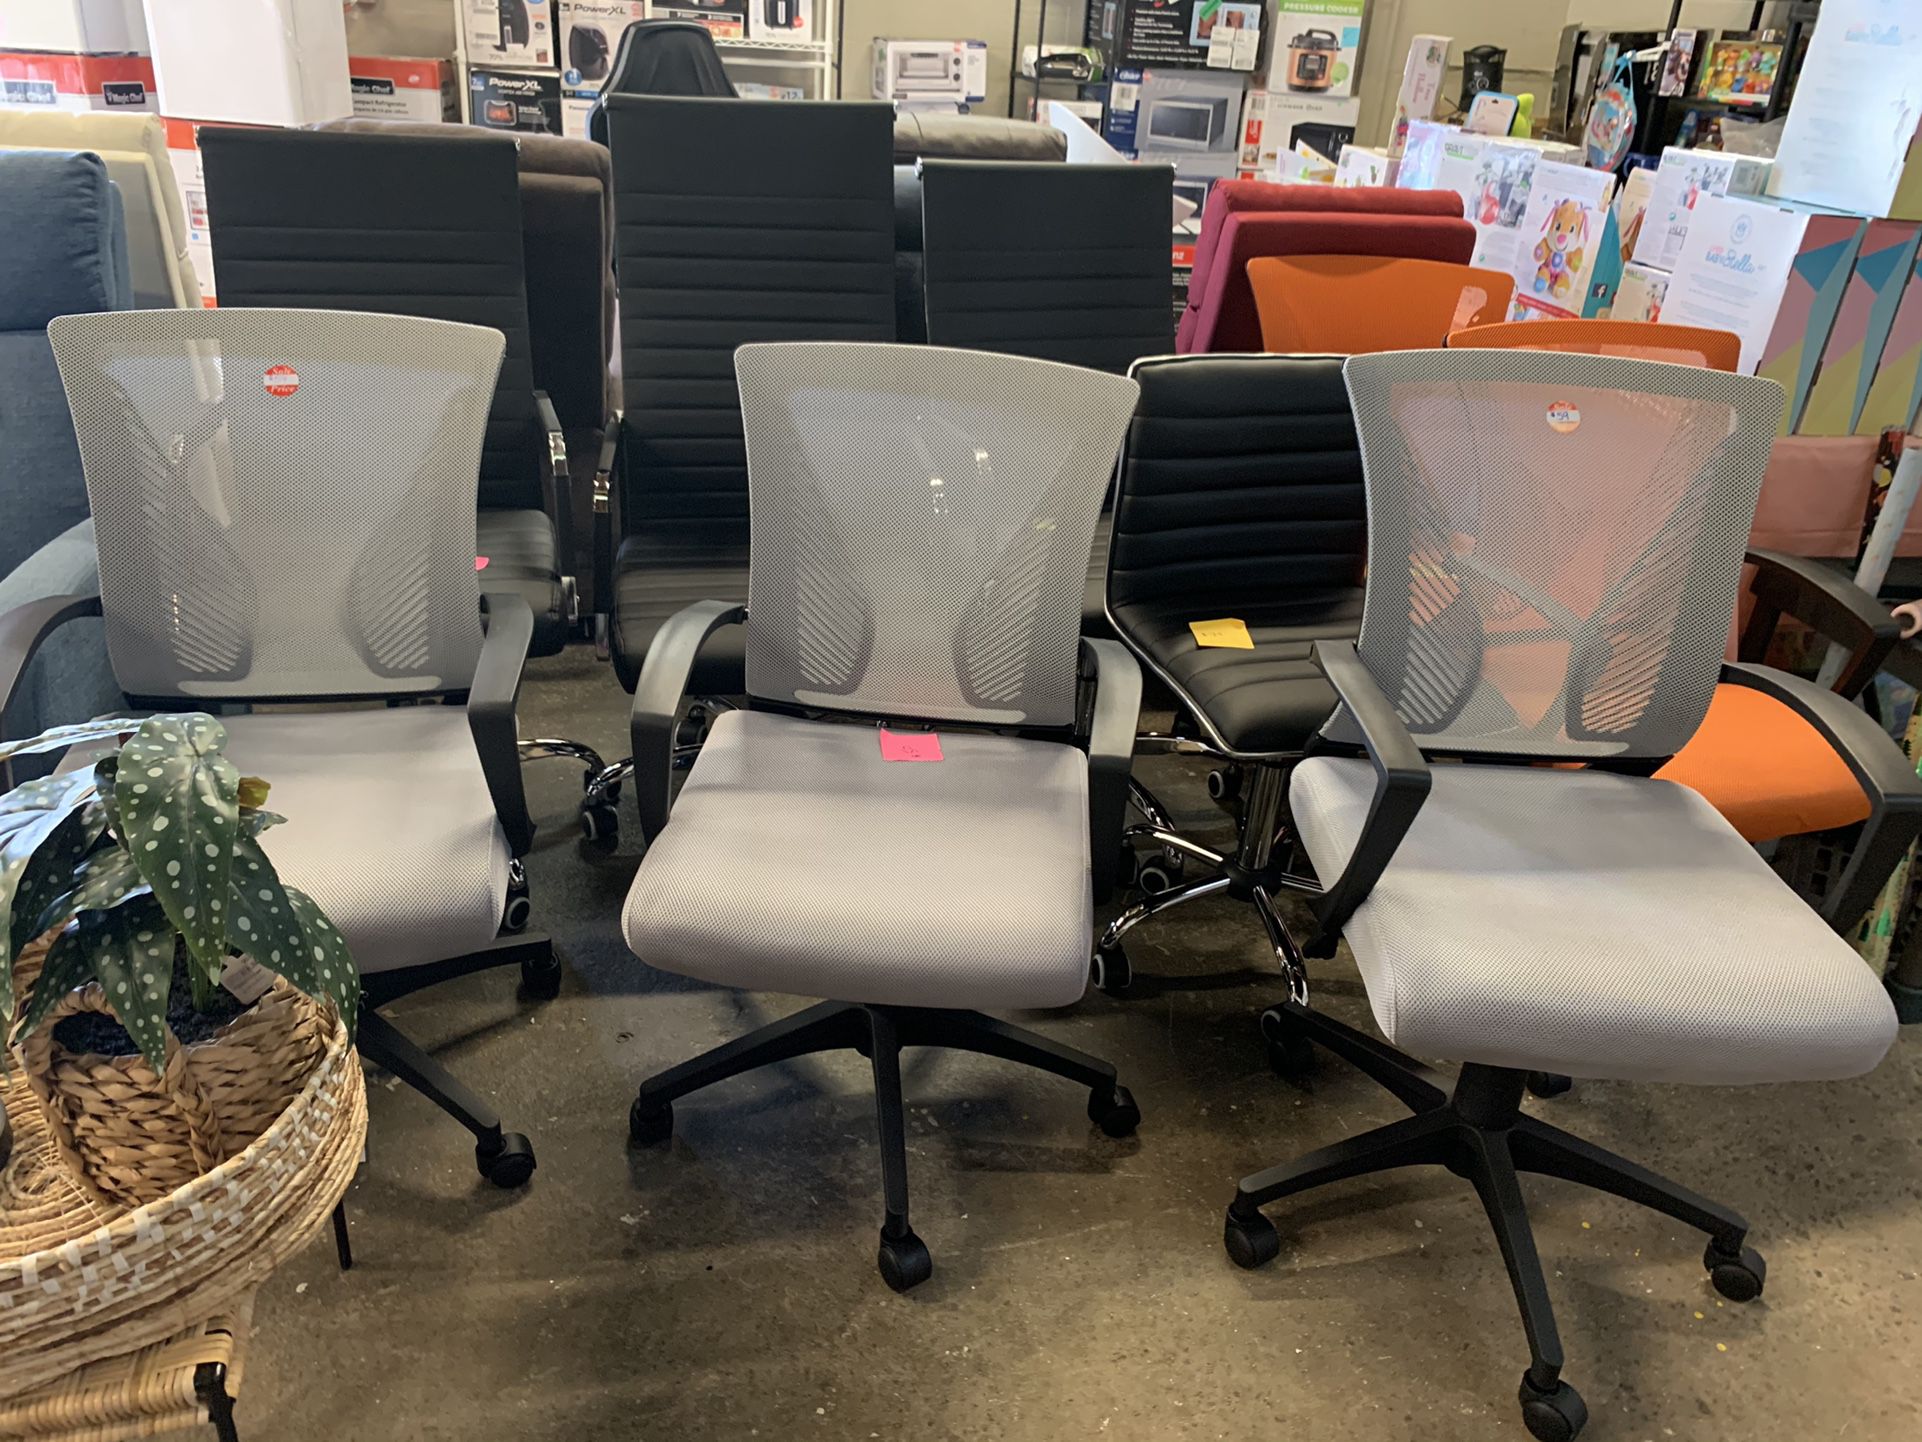 Office Chairs $50-$69 Depending On Style New